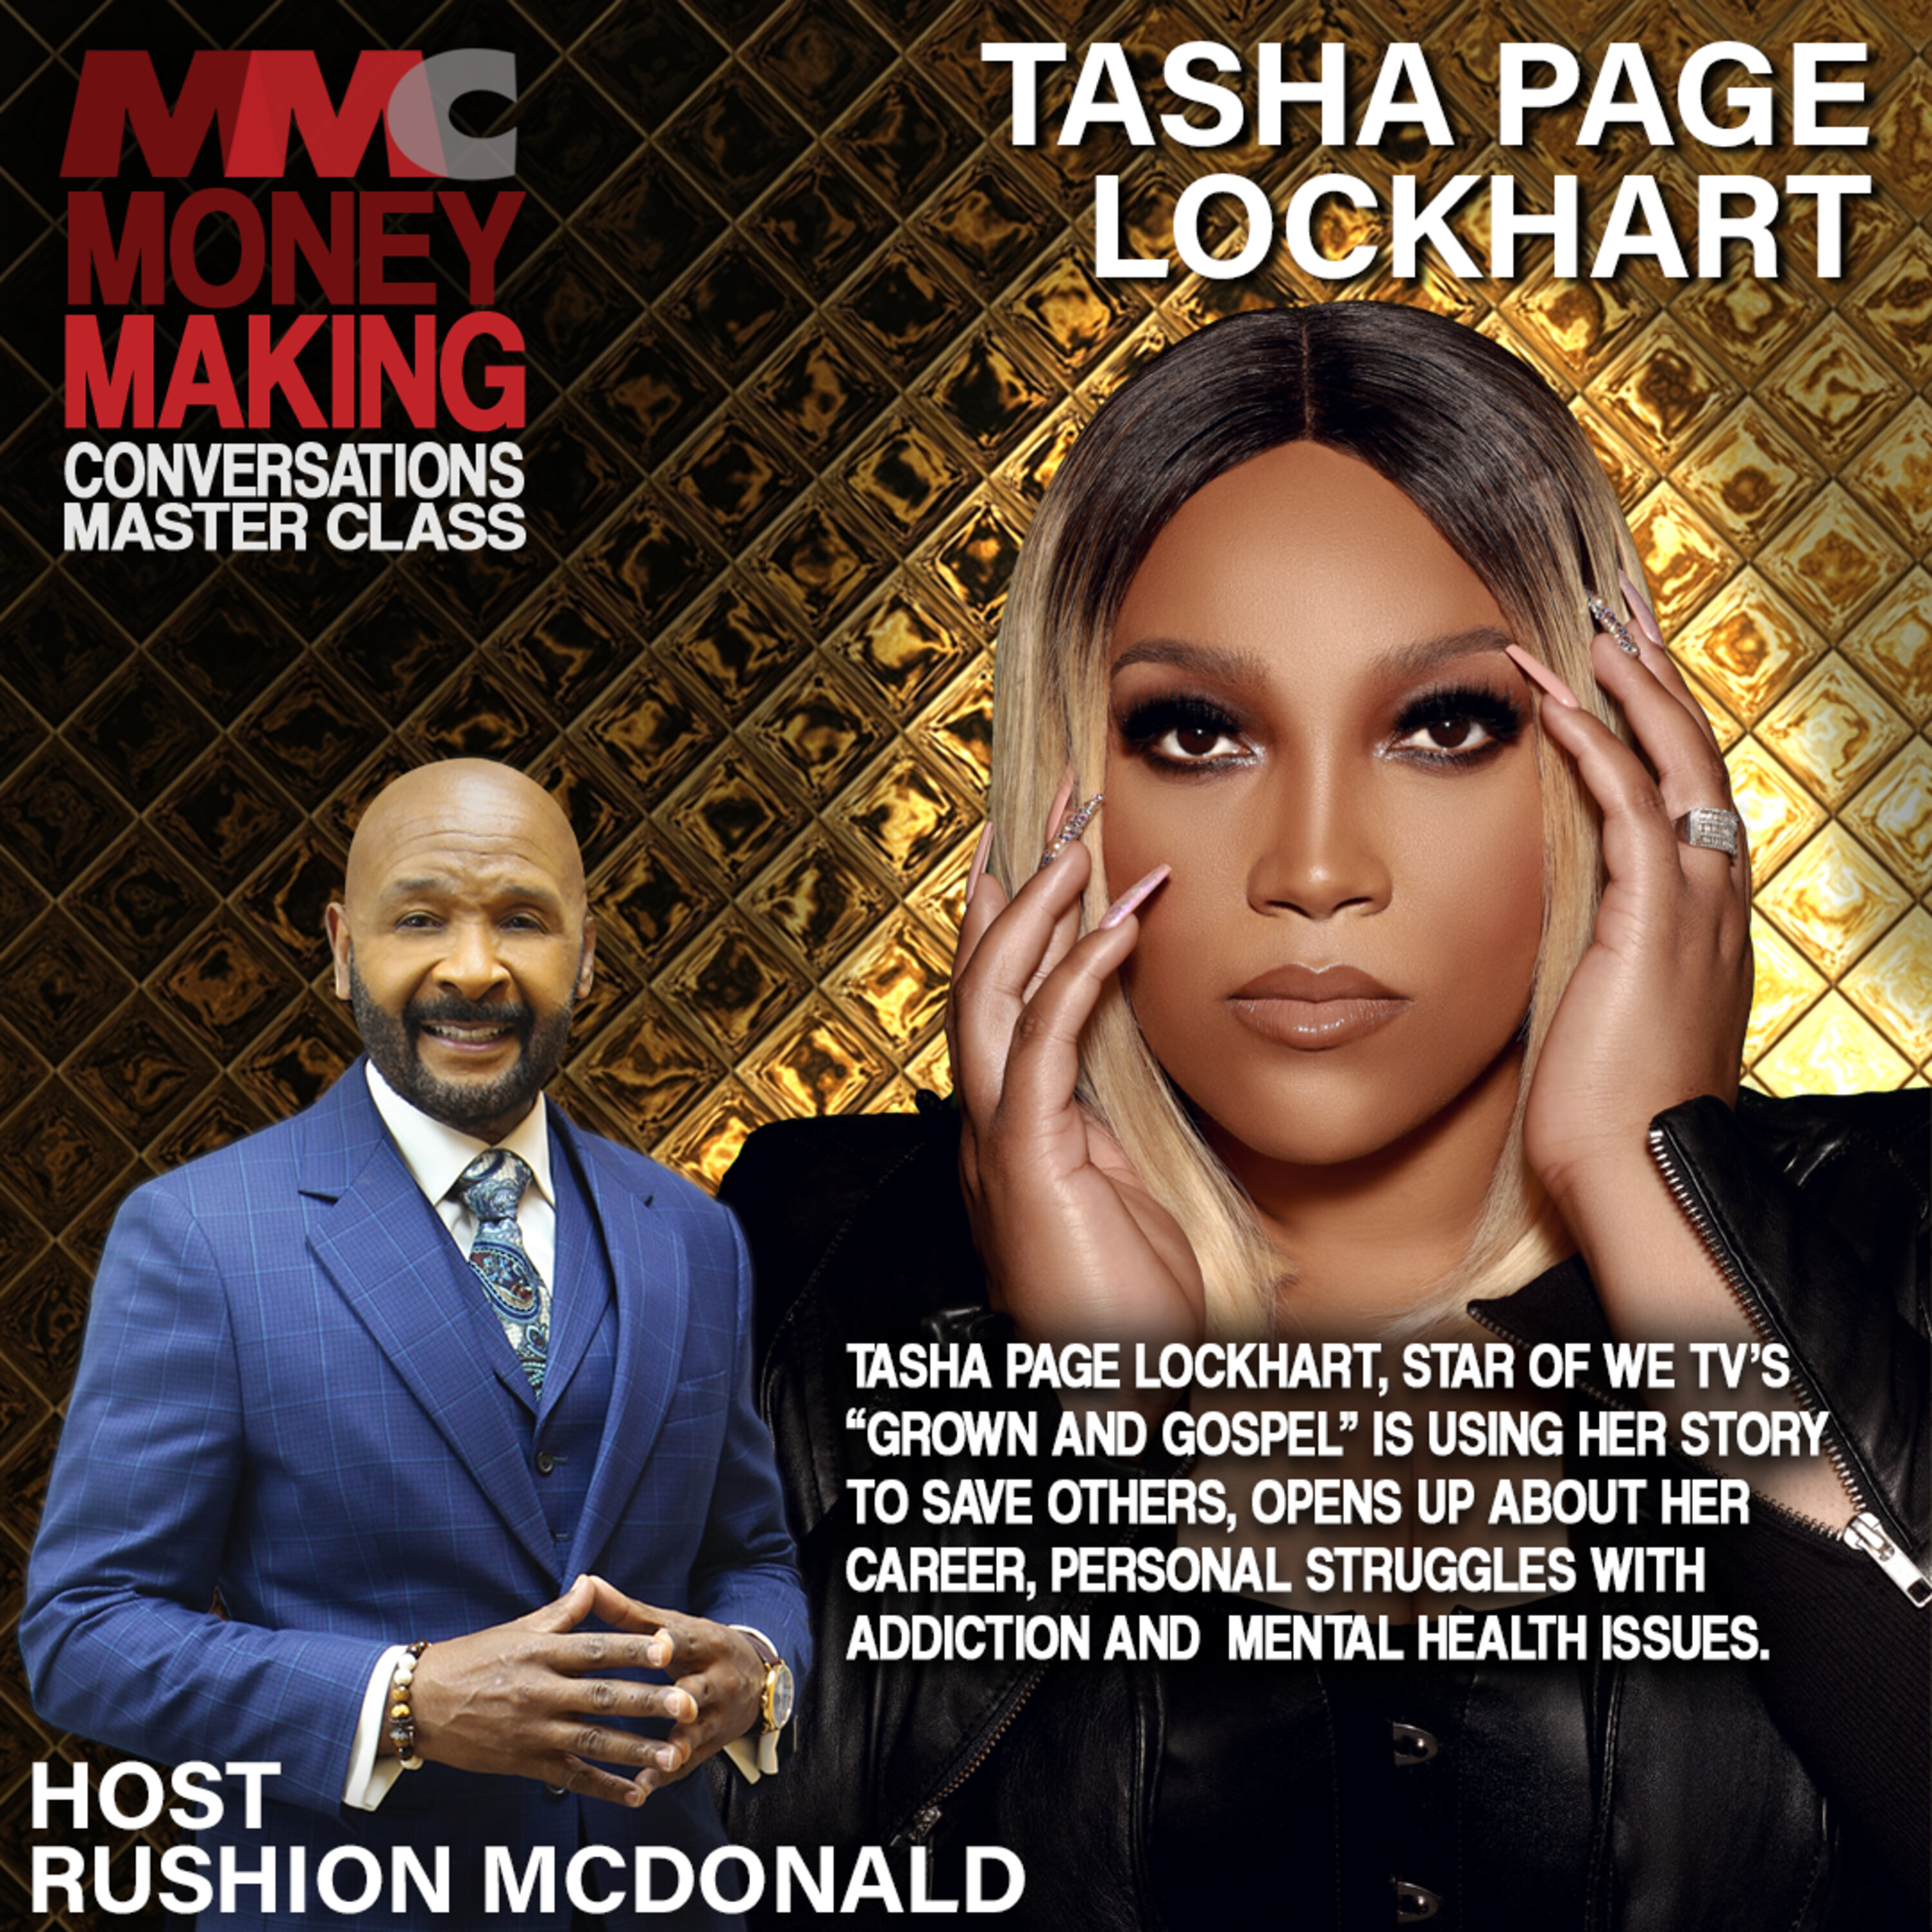 Rushion interviews Tasha Page Lockhart, star of WE tv’s “Grown and Gospel.”  She opens up about personal struggles with addiction and mental health issues, including depression and anxiety.